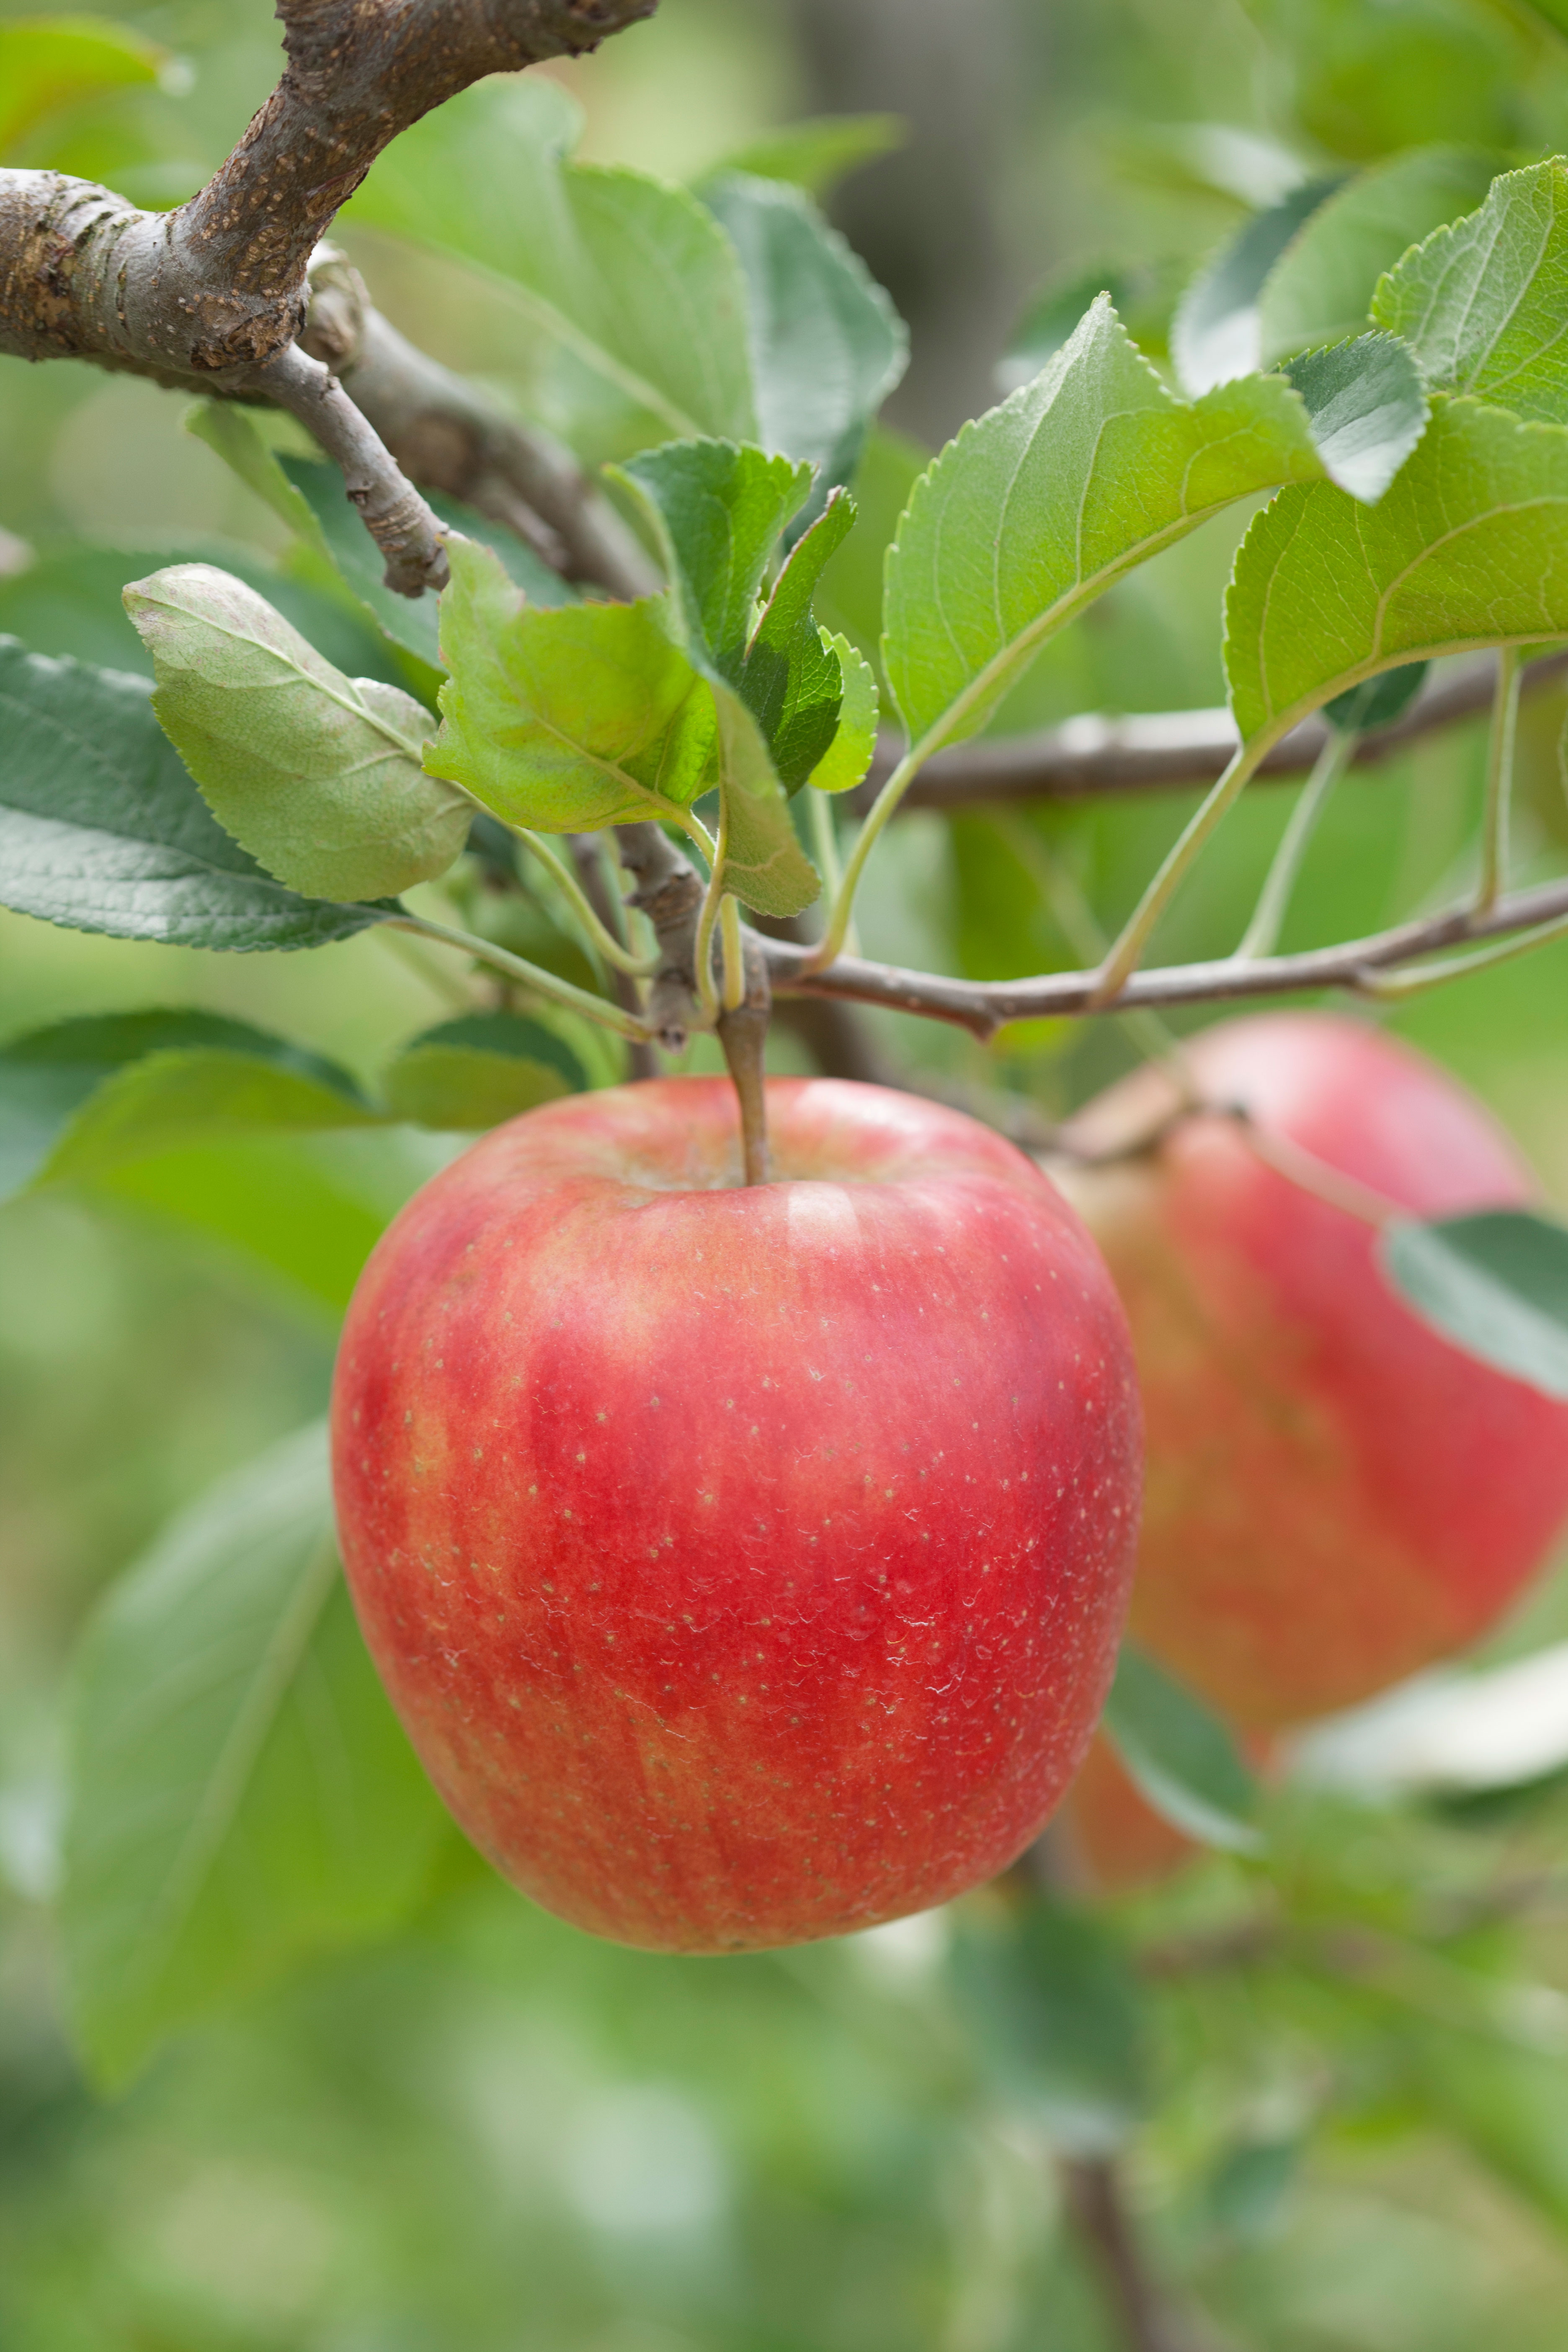 Planting and Caring for Fruit Trees